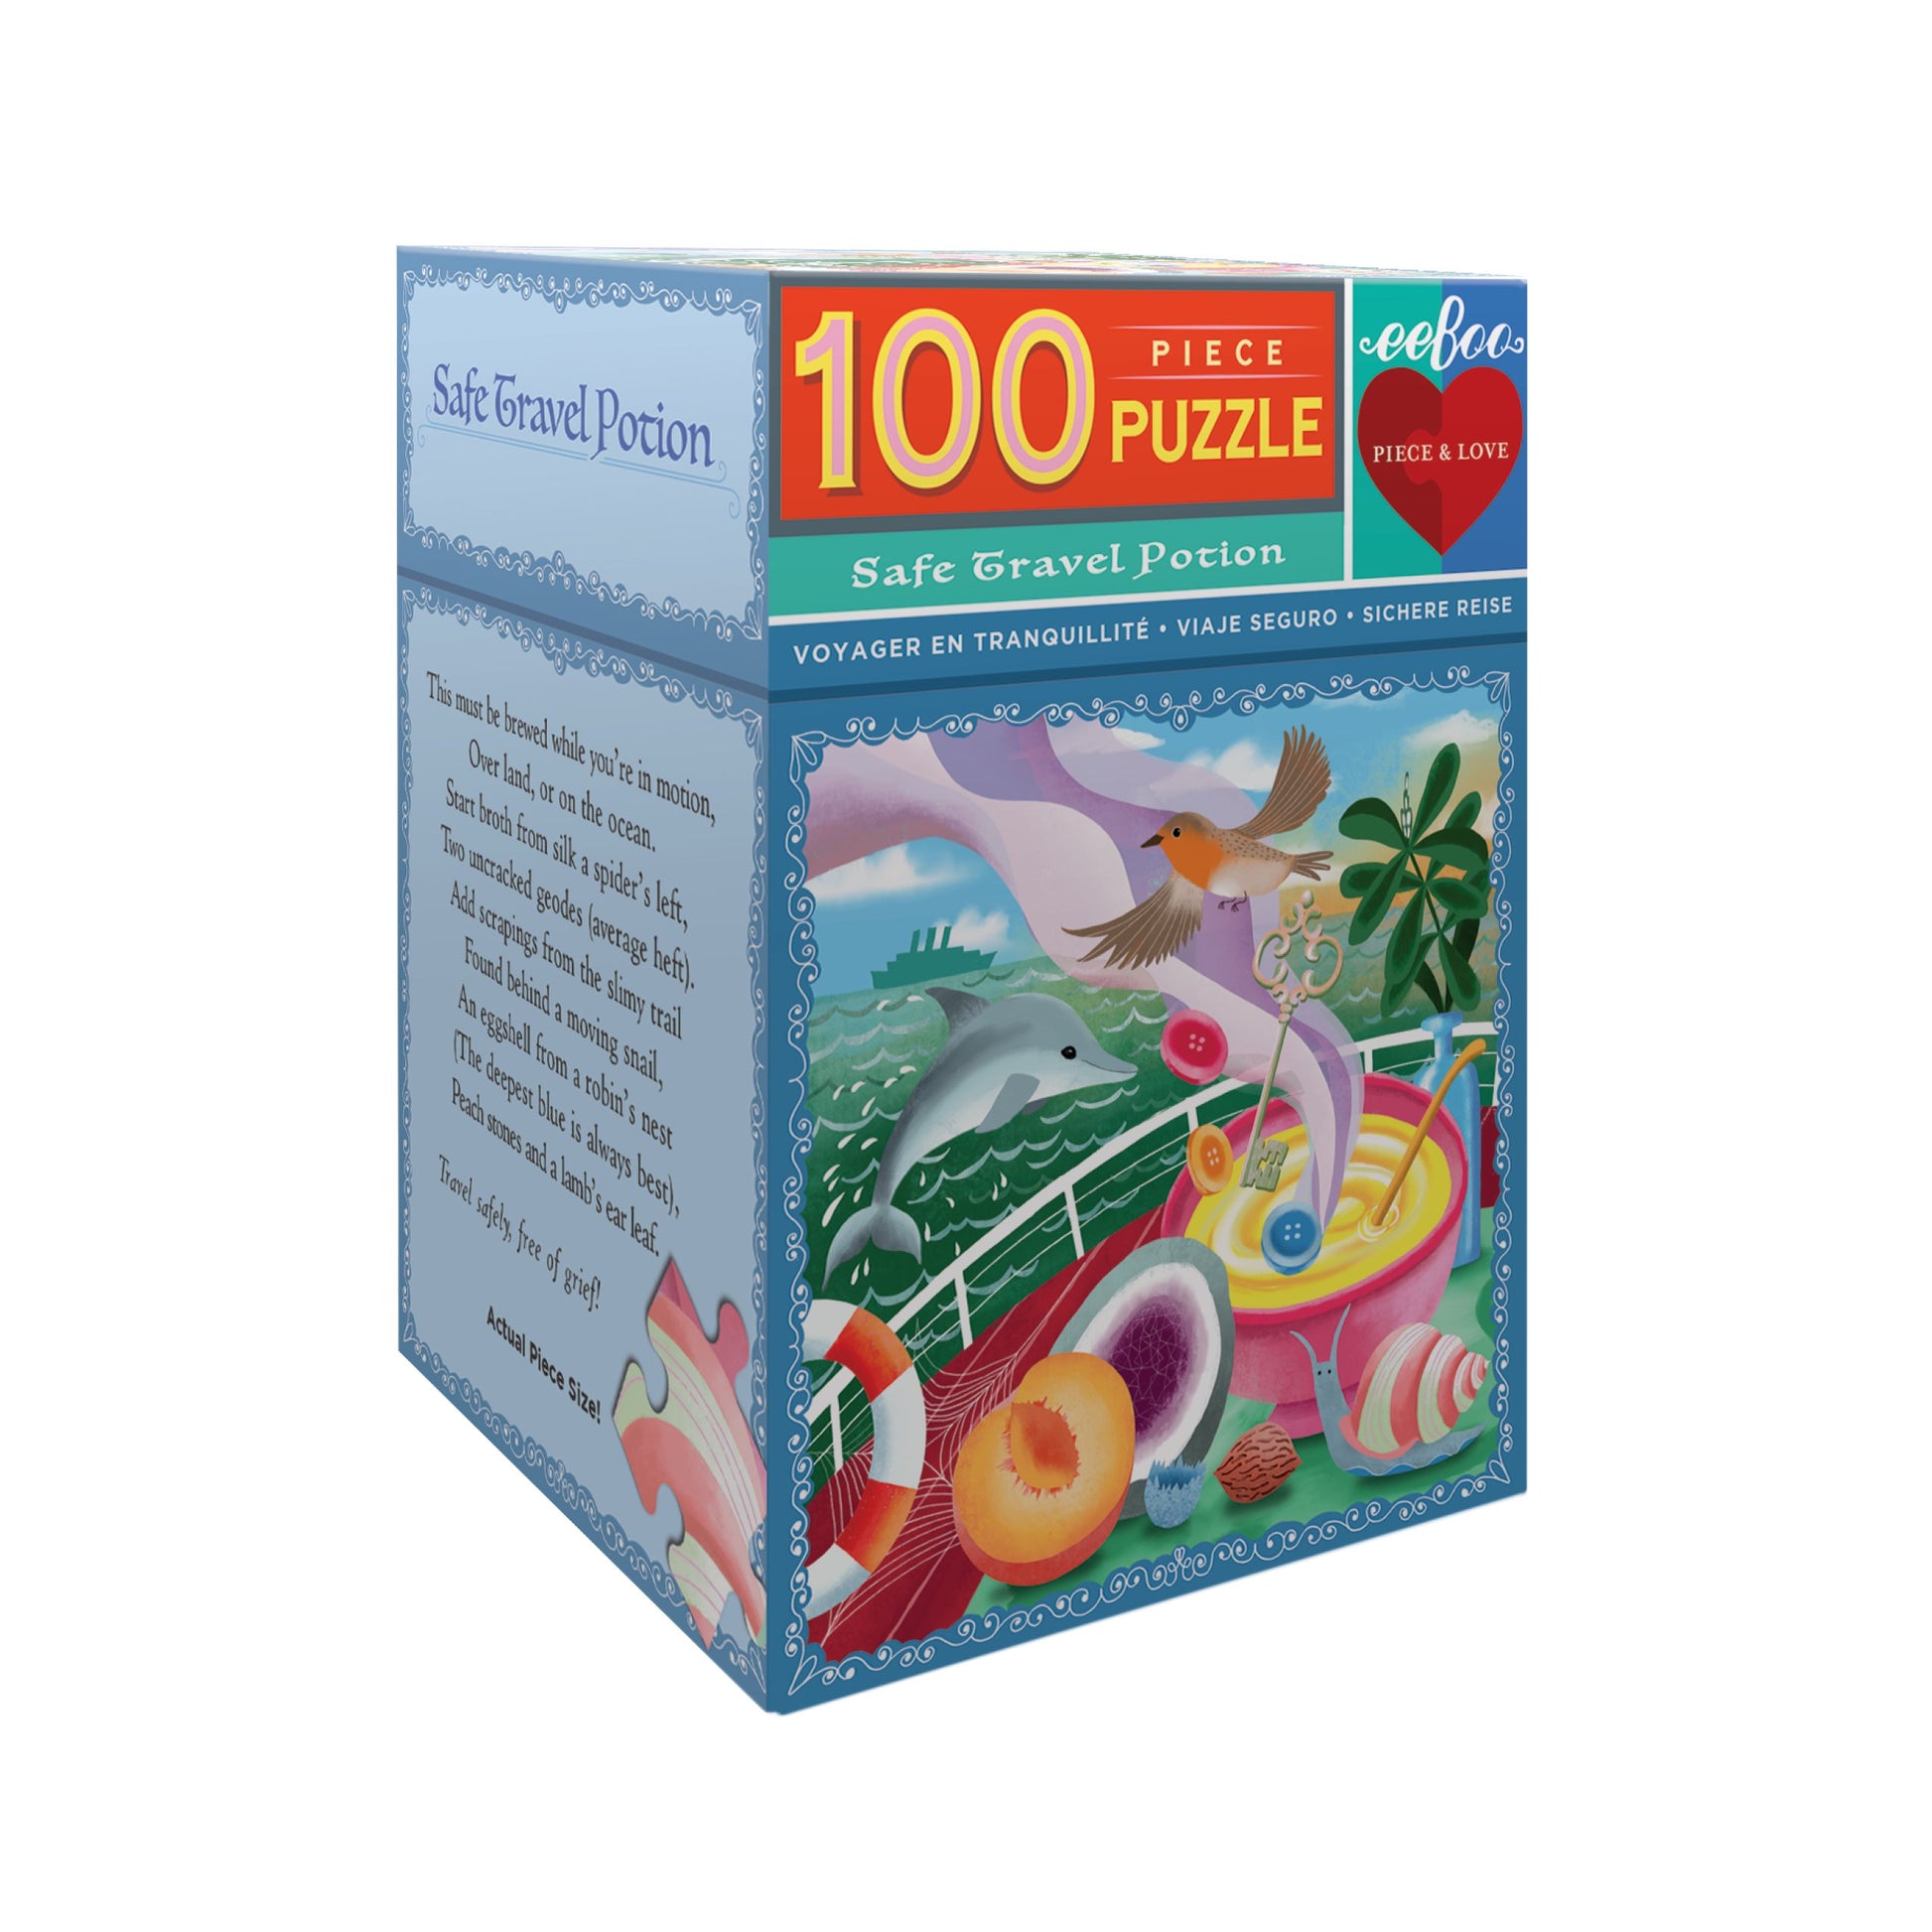 Safe Travels Potion 100 Piece Puzzle |  Gifts by eeBoo